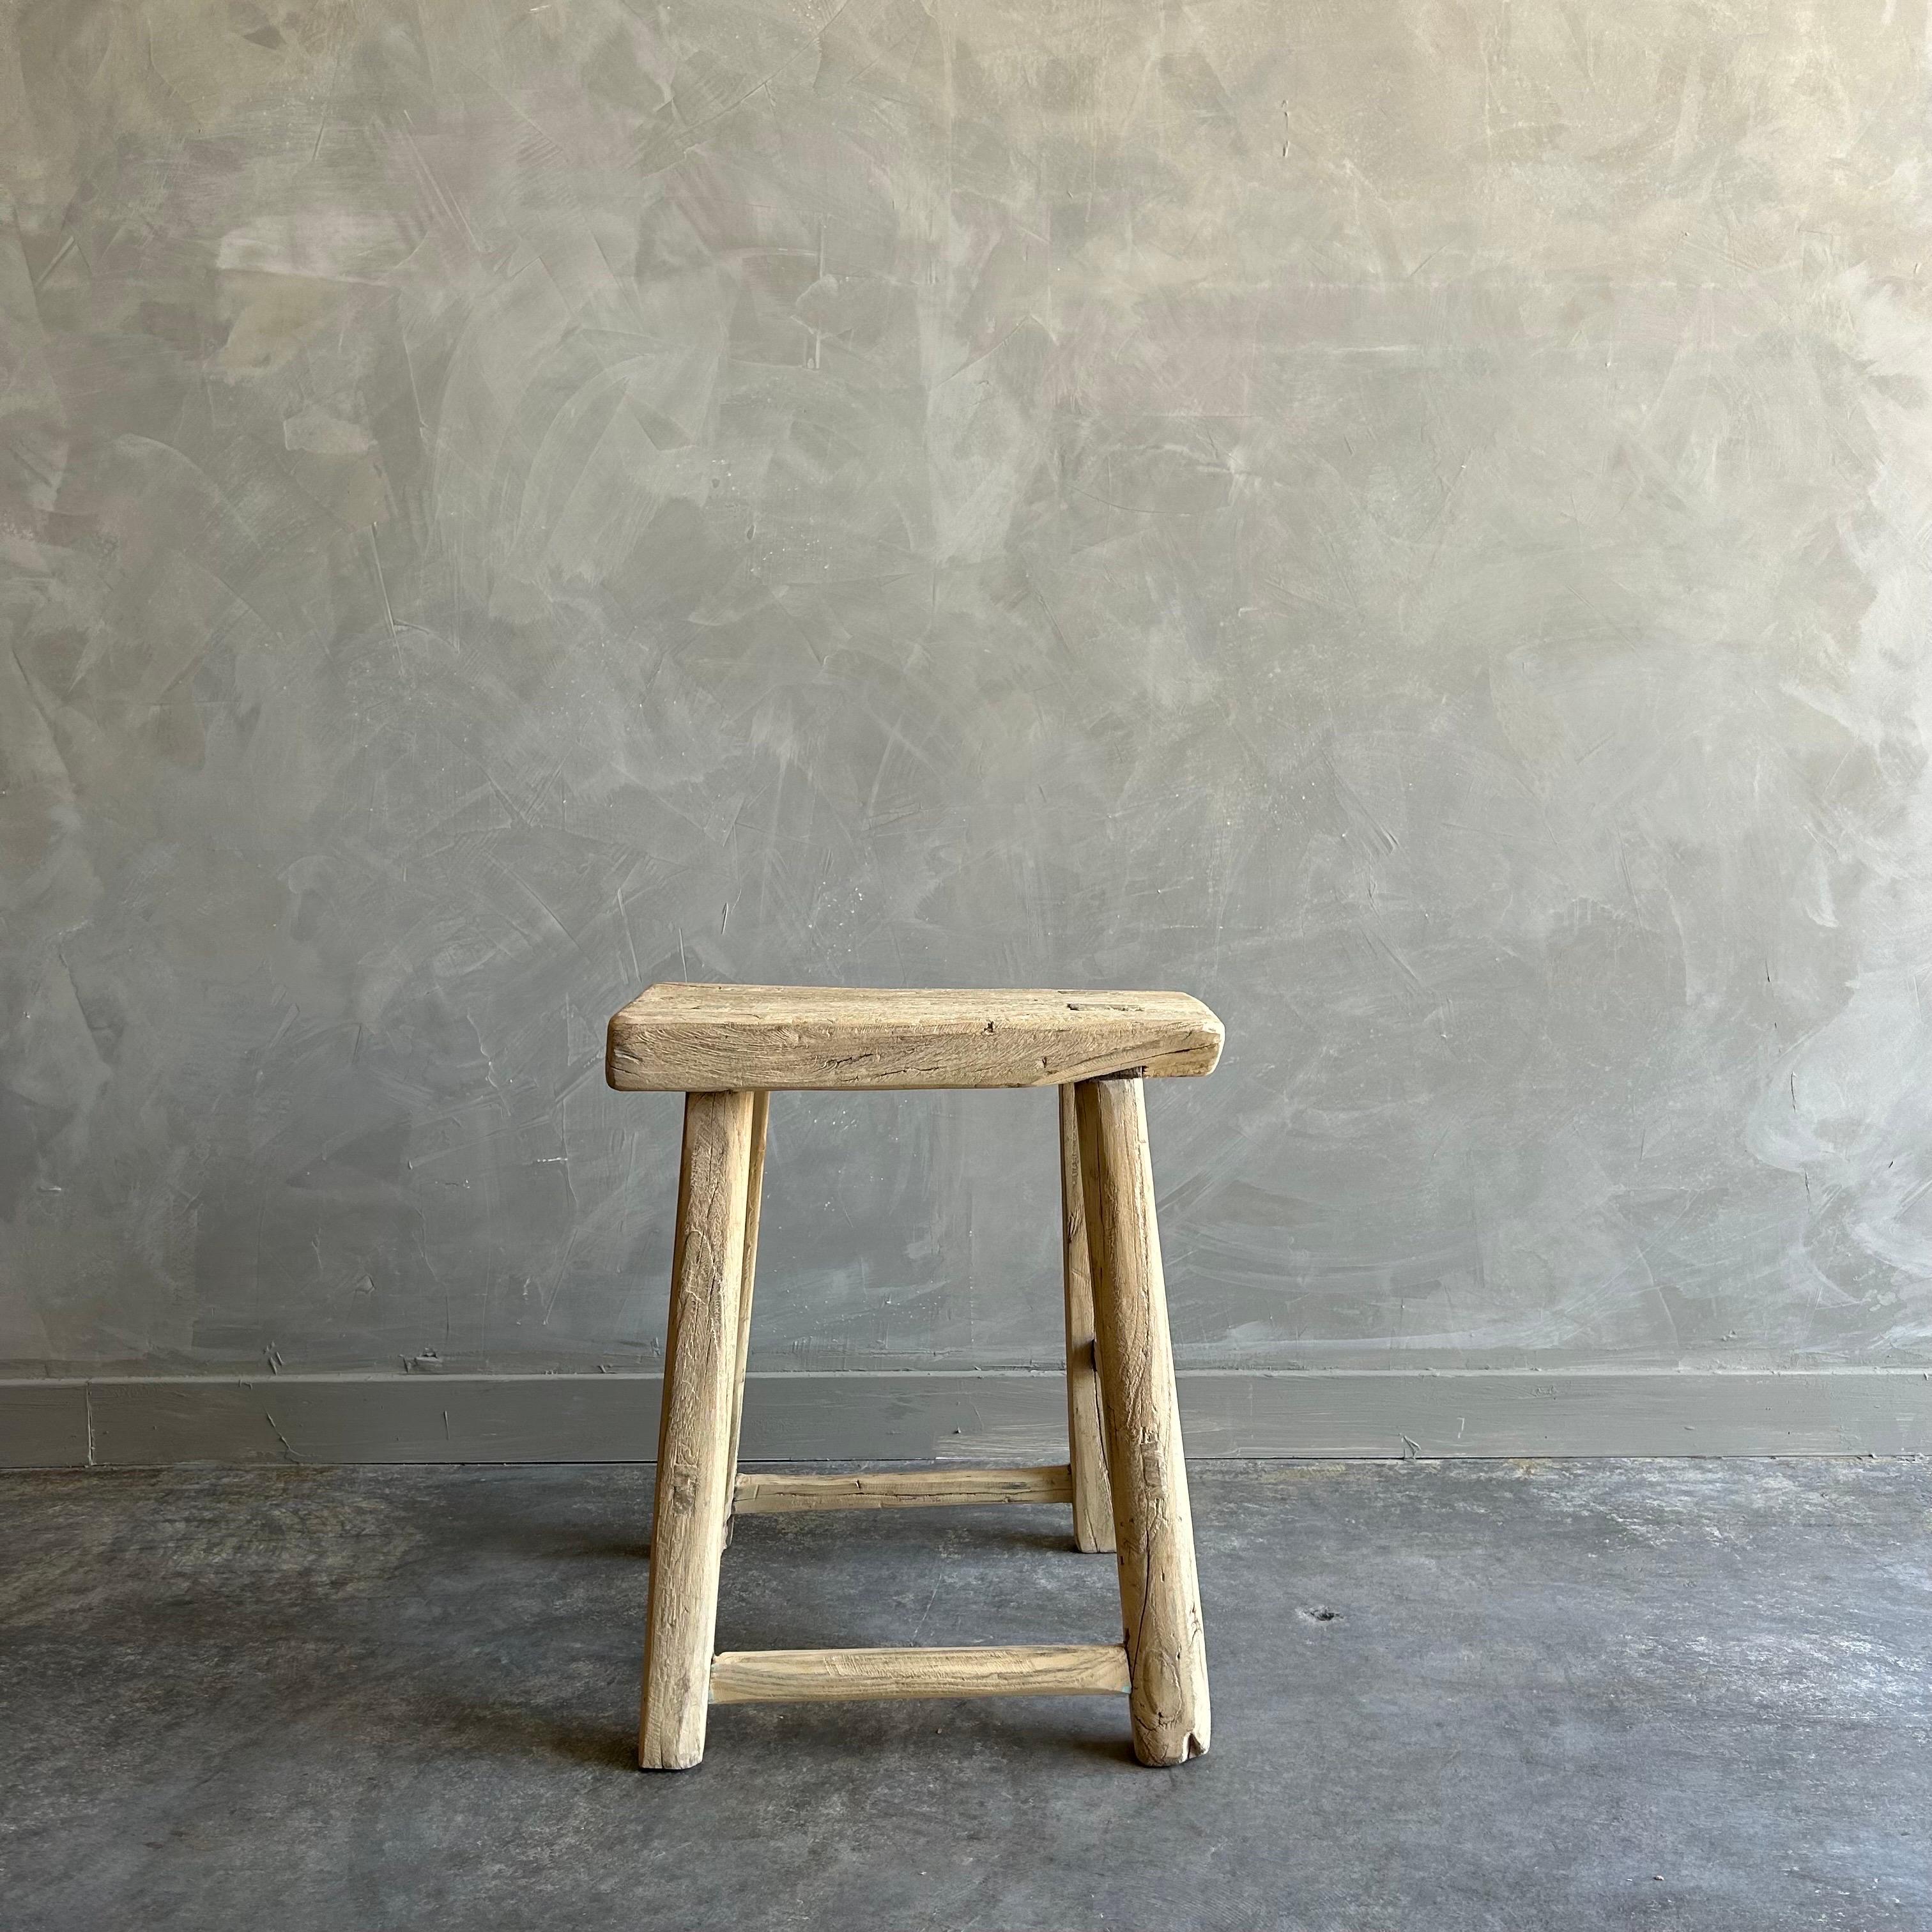 Welcome to bloomhomeinc we stock over 2000 items, please scroll down and click view sellers other items to see more!
Size:   18”w x 17”d x 21”h
SD:10”
Vintage Antique Elm Wood stool made from vintage reclaimed elm wood. Beautiful antique patina,